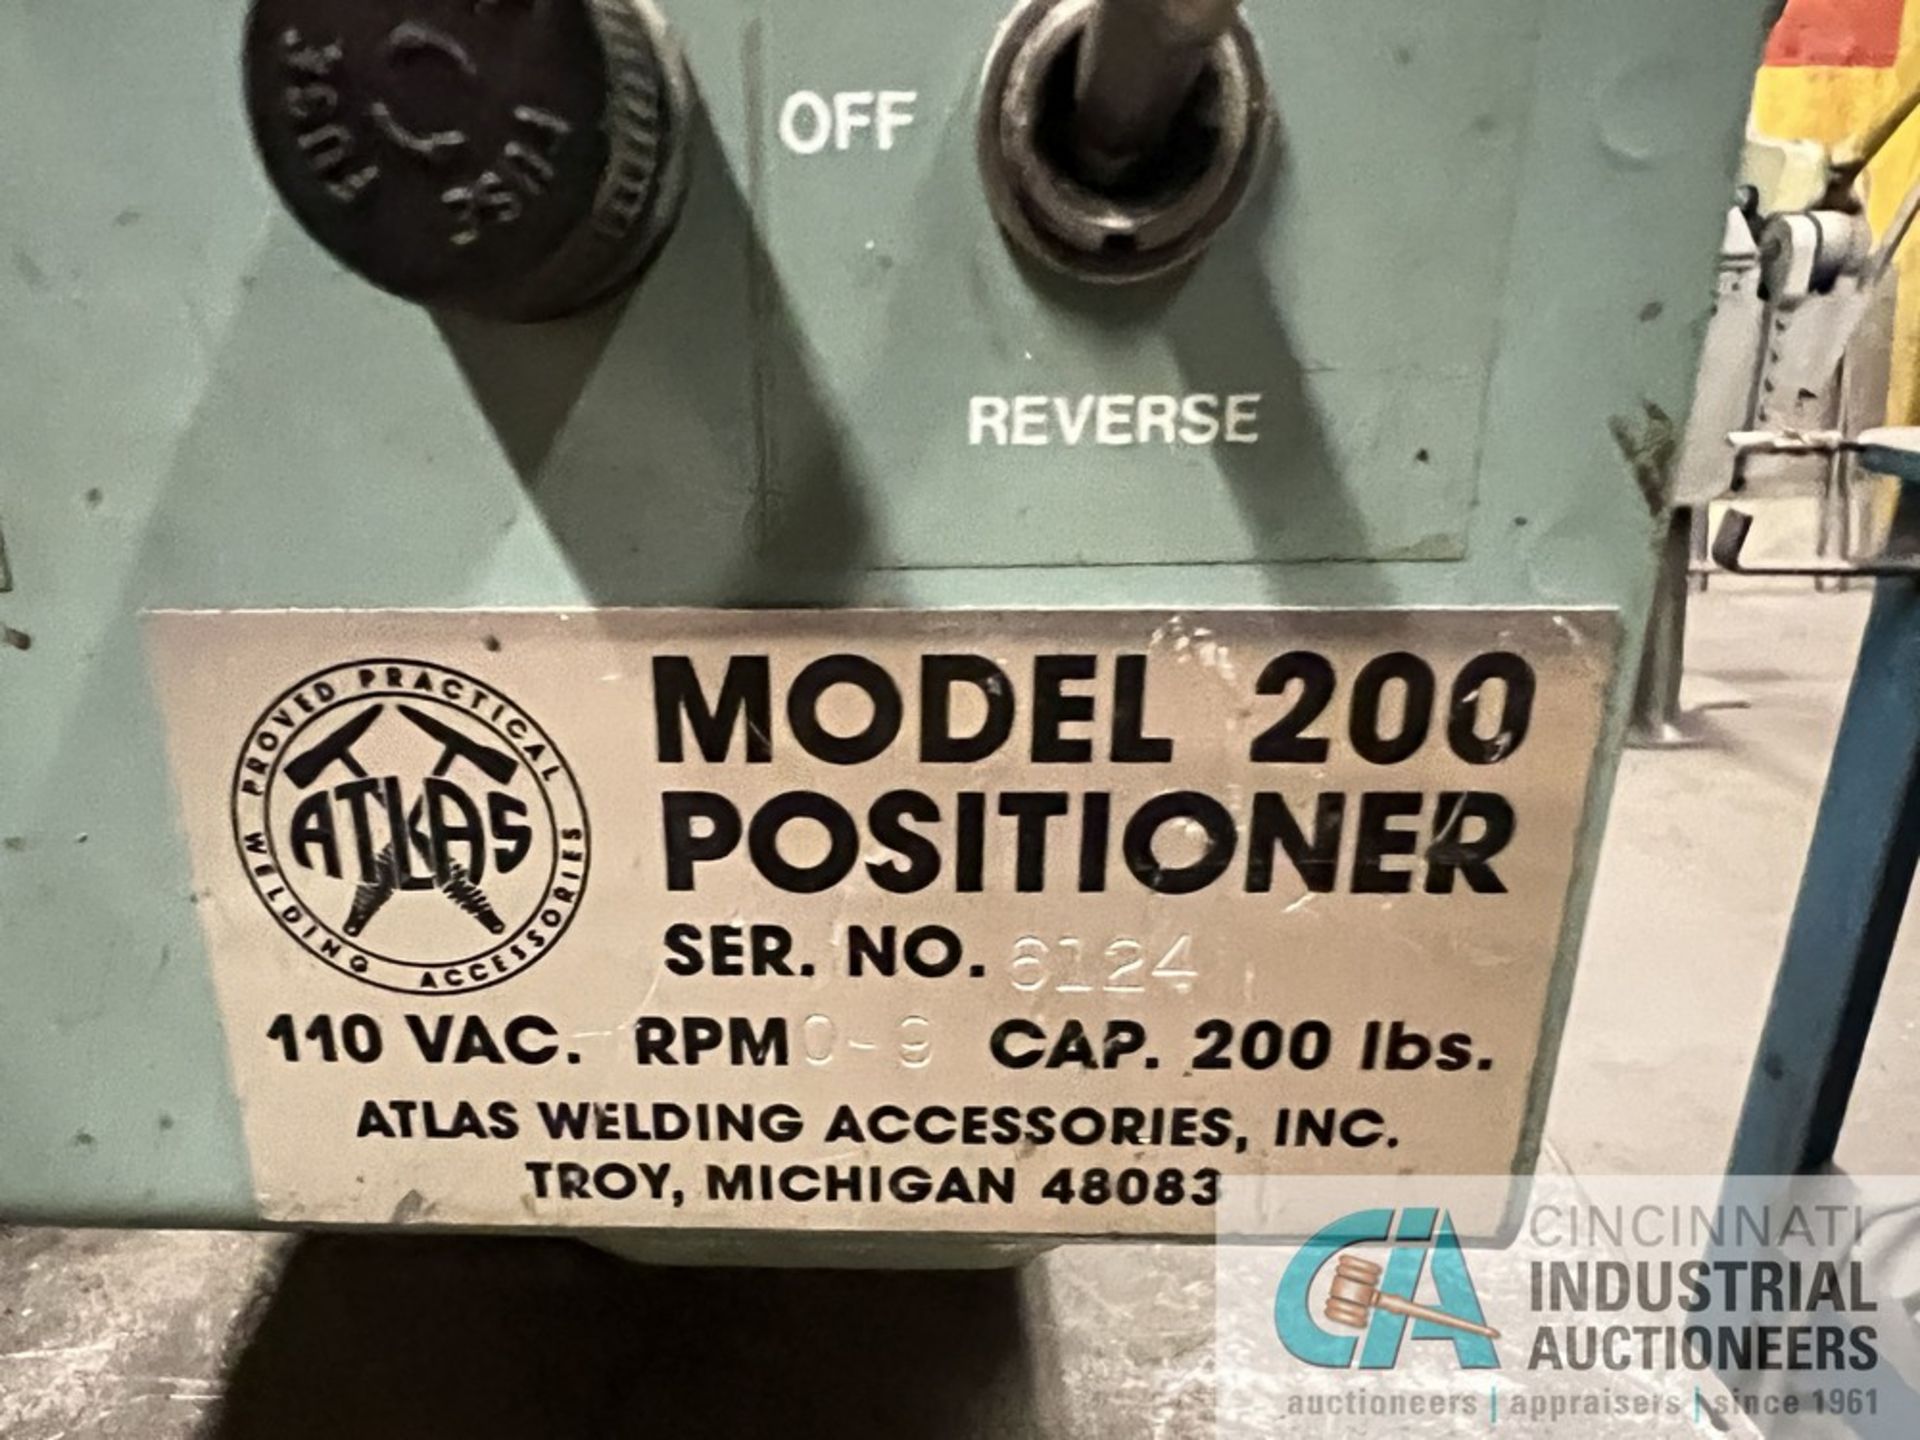 ATLAS MODEL 200 POSITIONER; S/N 6124, 10" ROUND TABLE AREA, FOOT PEDAL CONTROL - Image 3 of 4